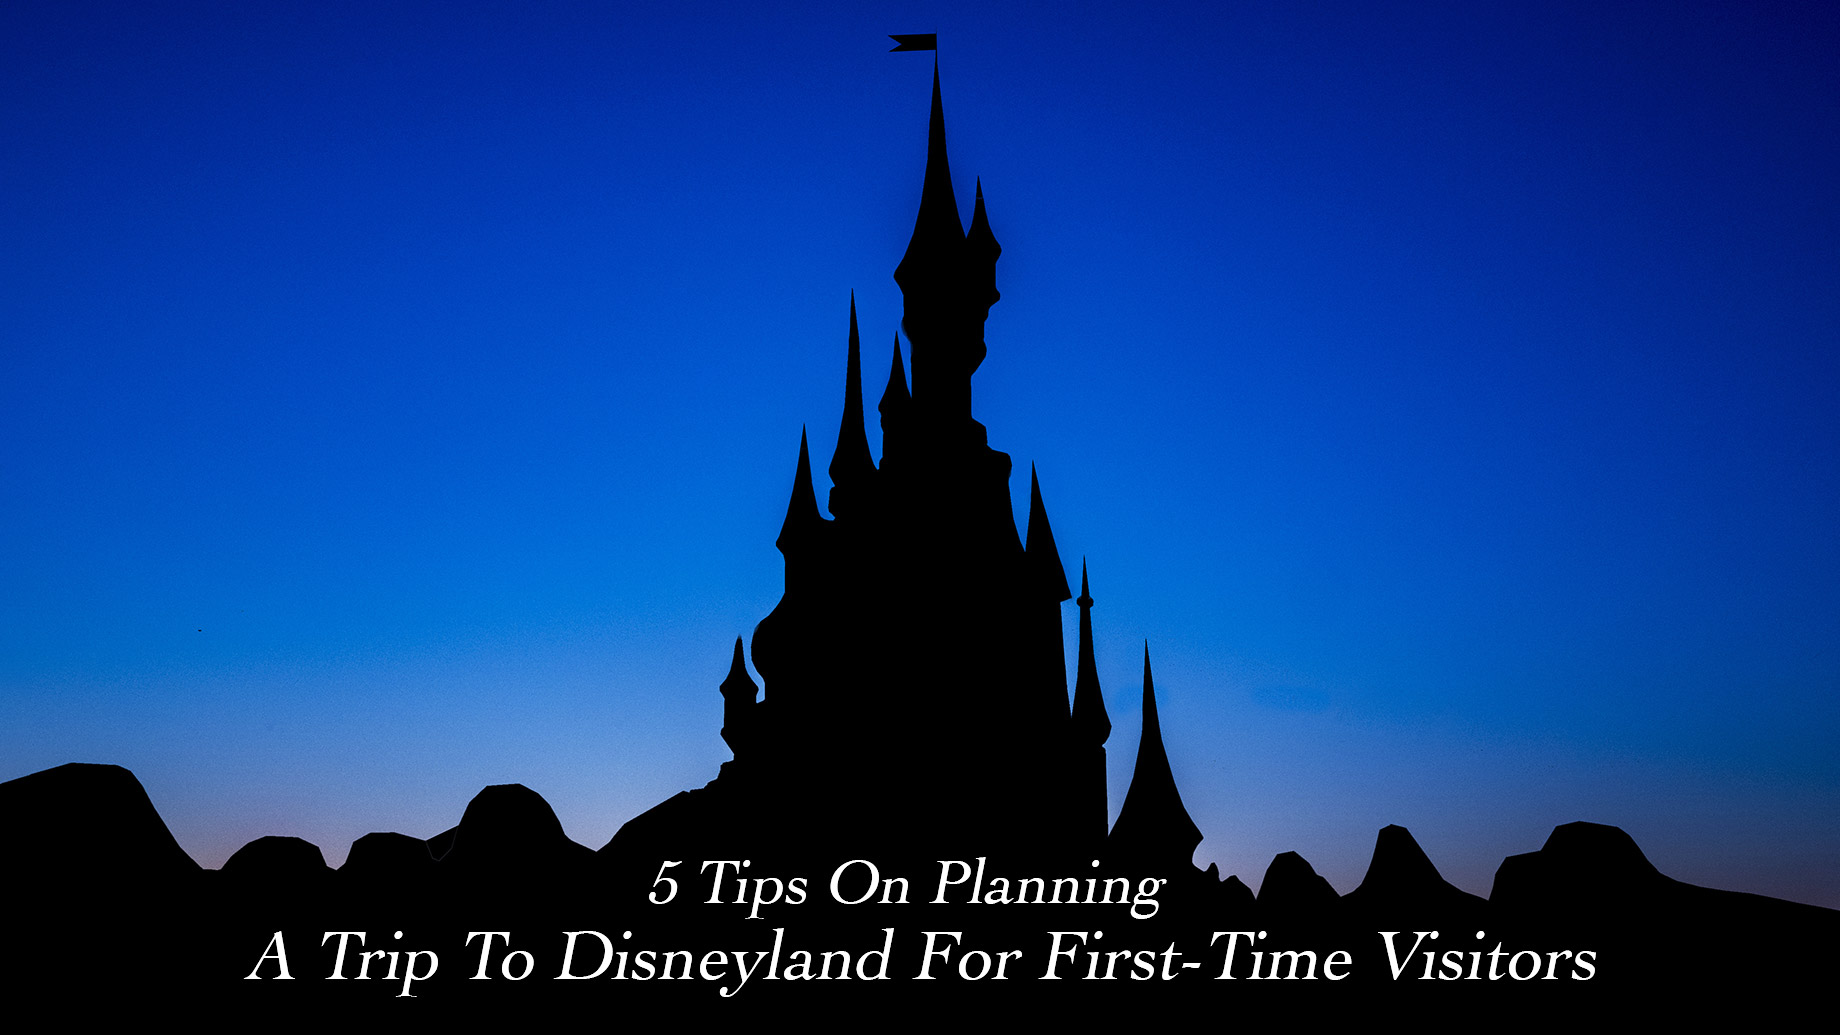 5 Tips On Planning A Trip To Disneyland For First-Time Visitors